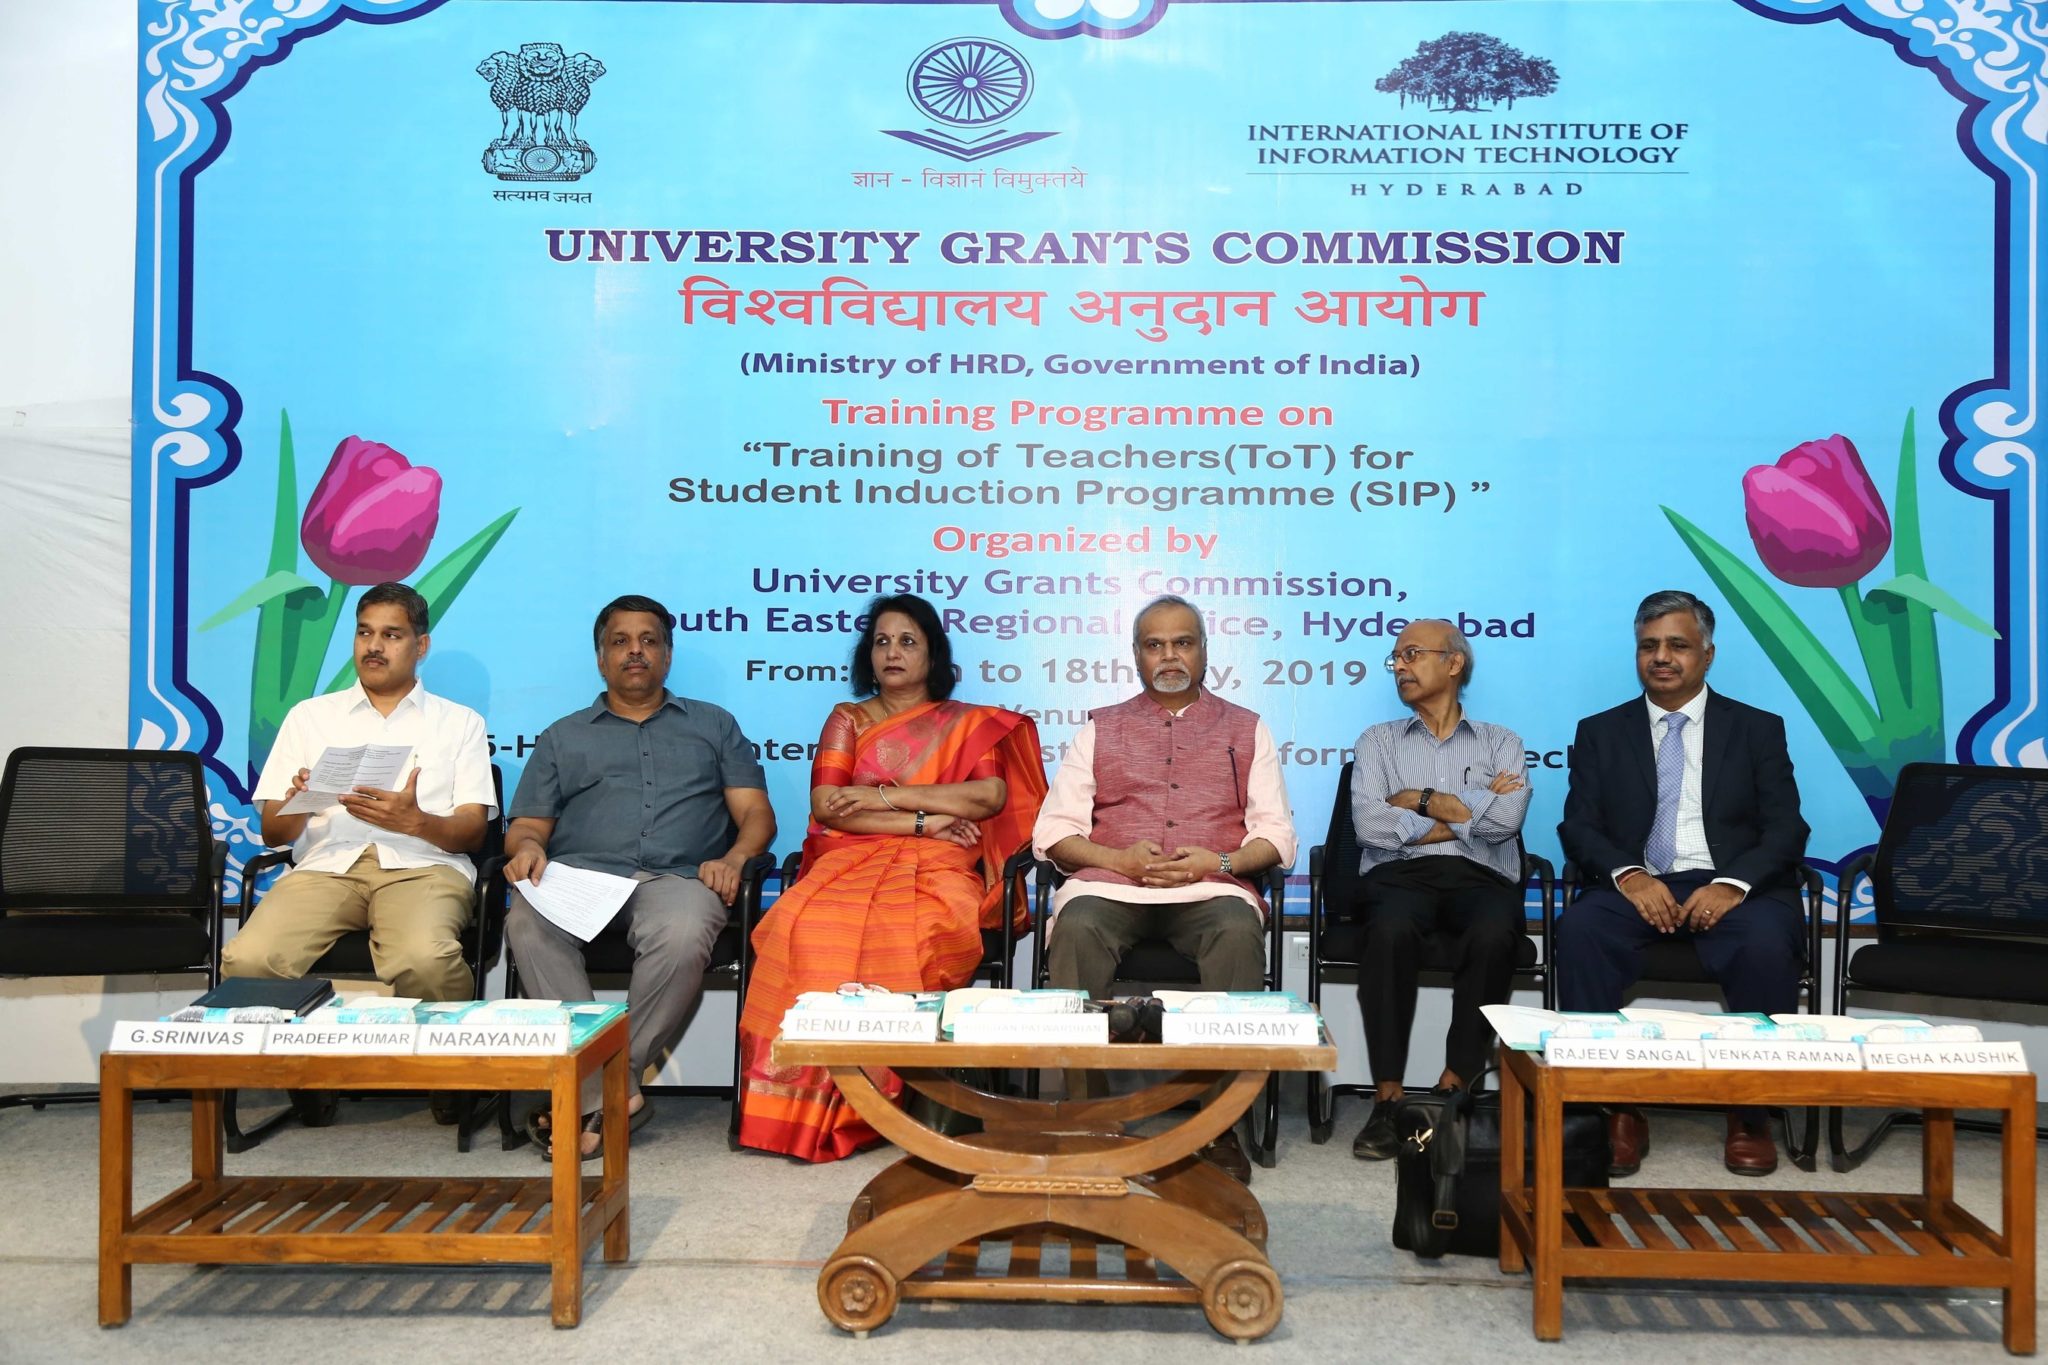 IIIT-Hyderabad Conducts First Training of Teachers for Student Induction Programme by UGC